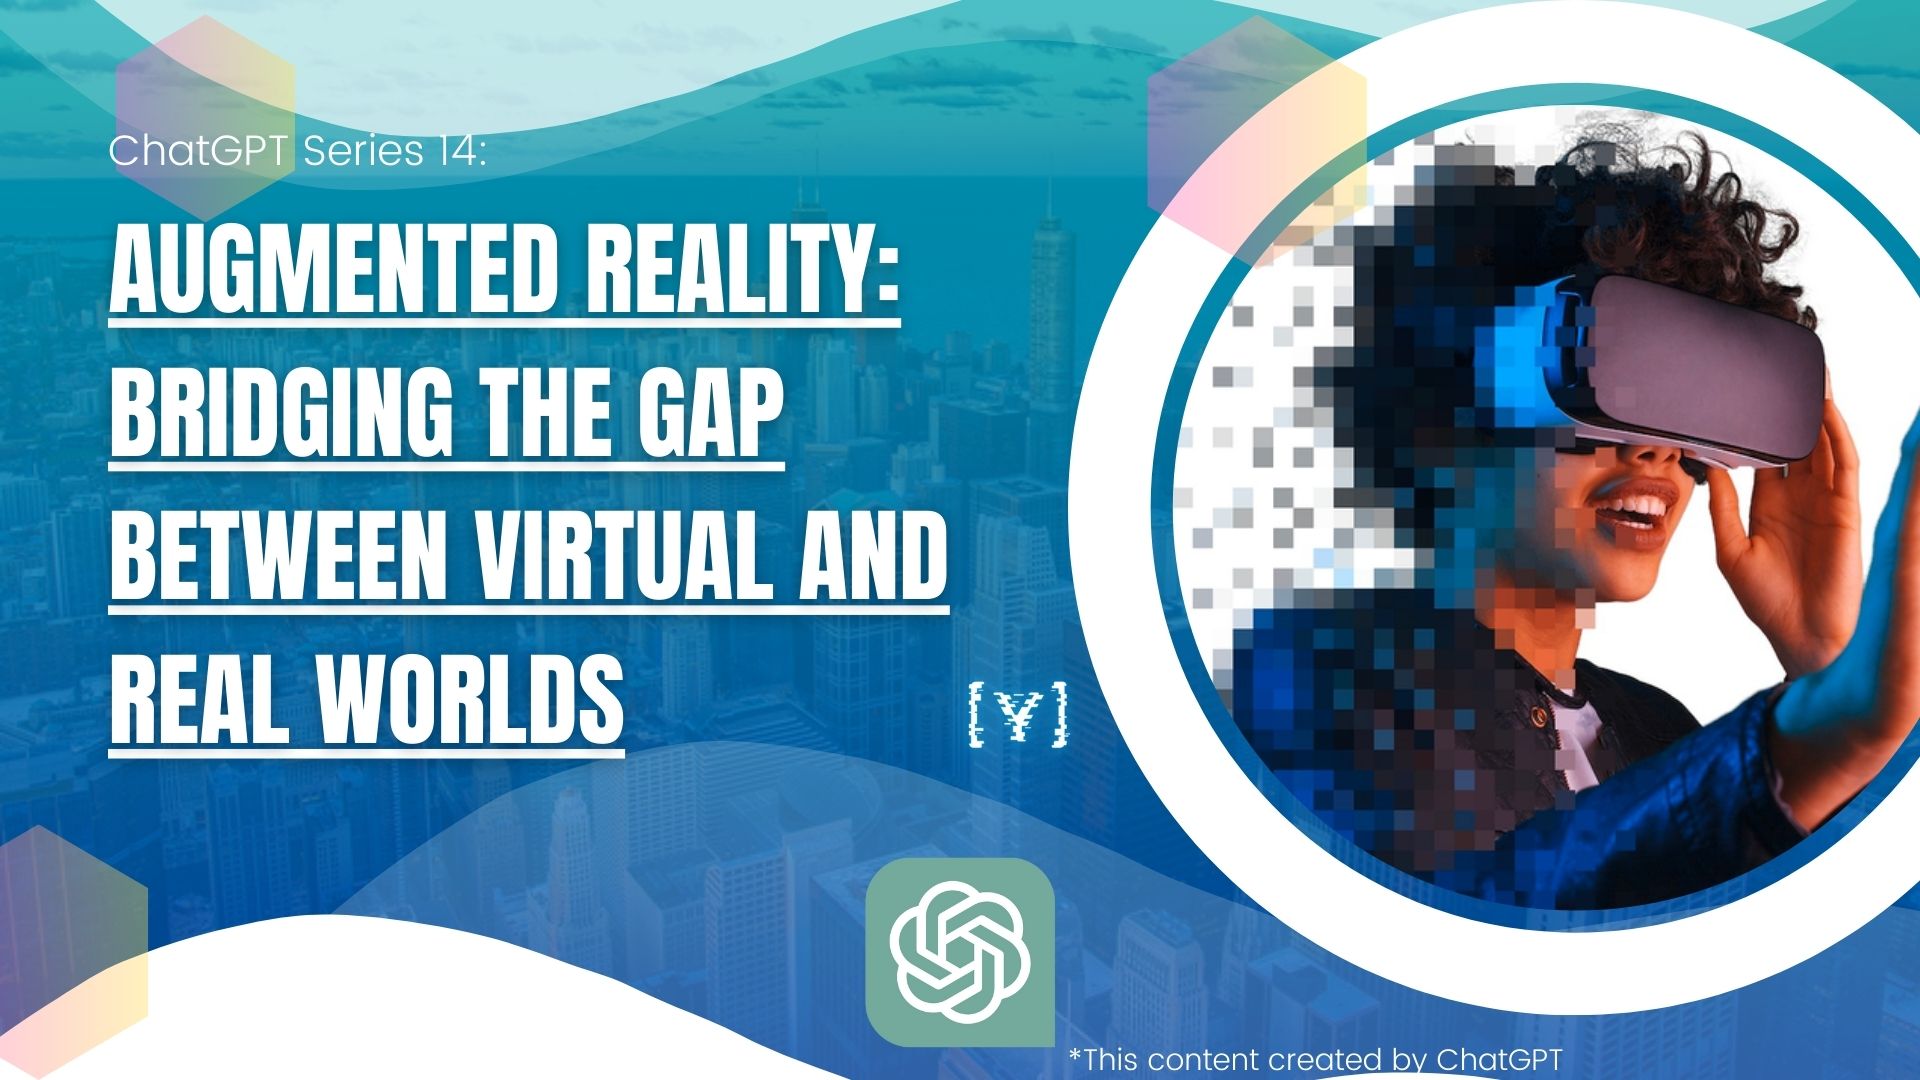 Augmented Reality: Bridging the Gap Between Virtual and Real Worlds